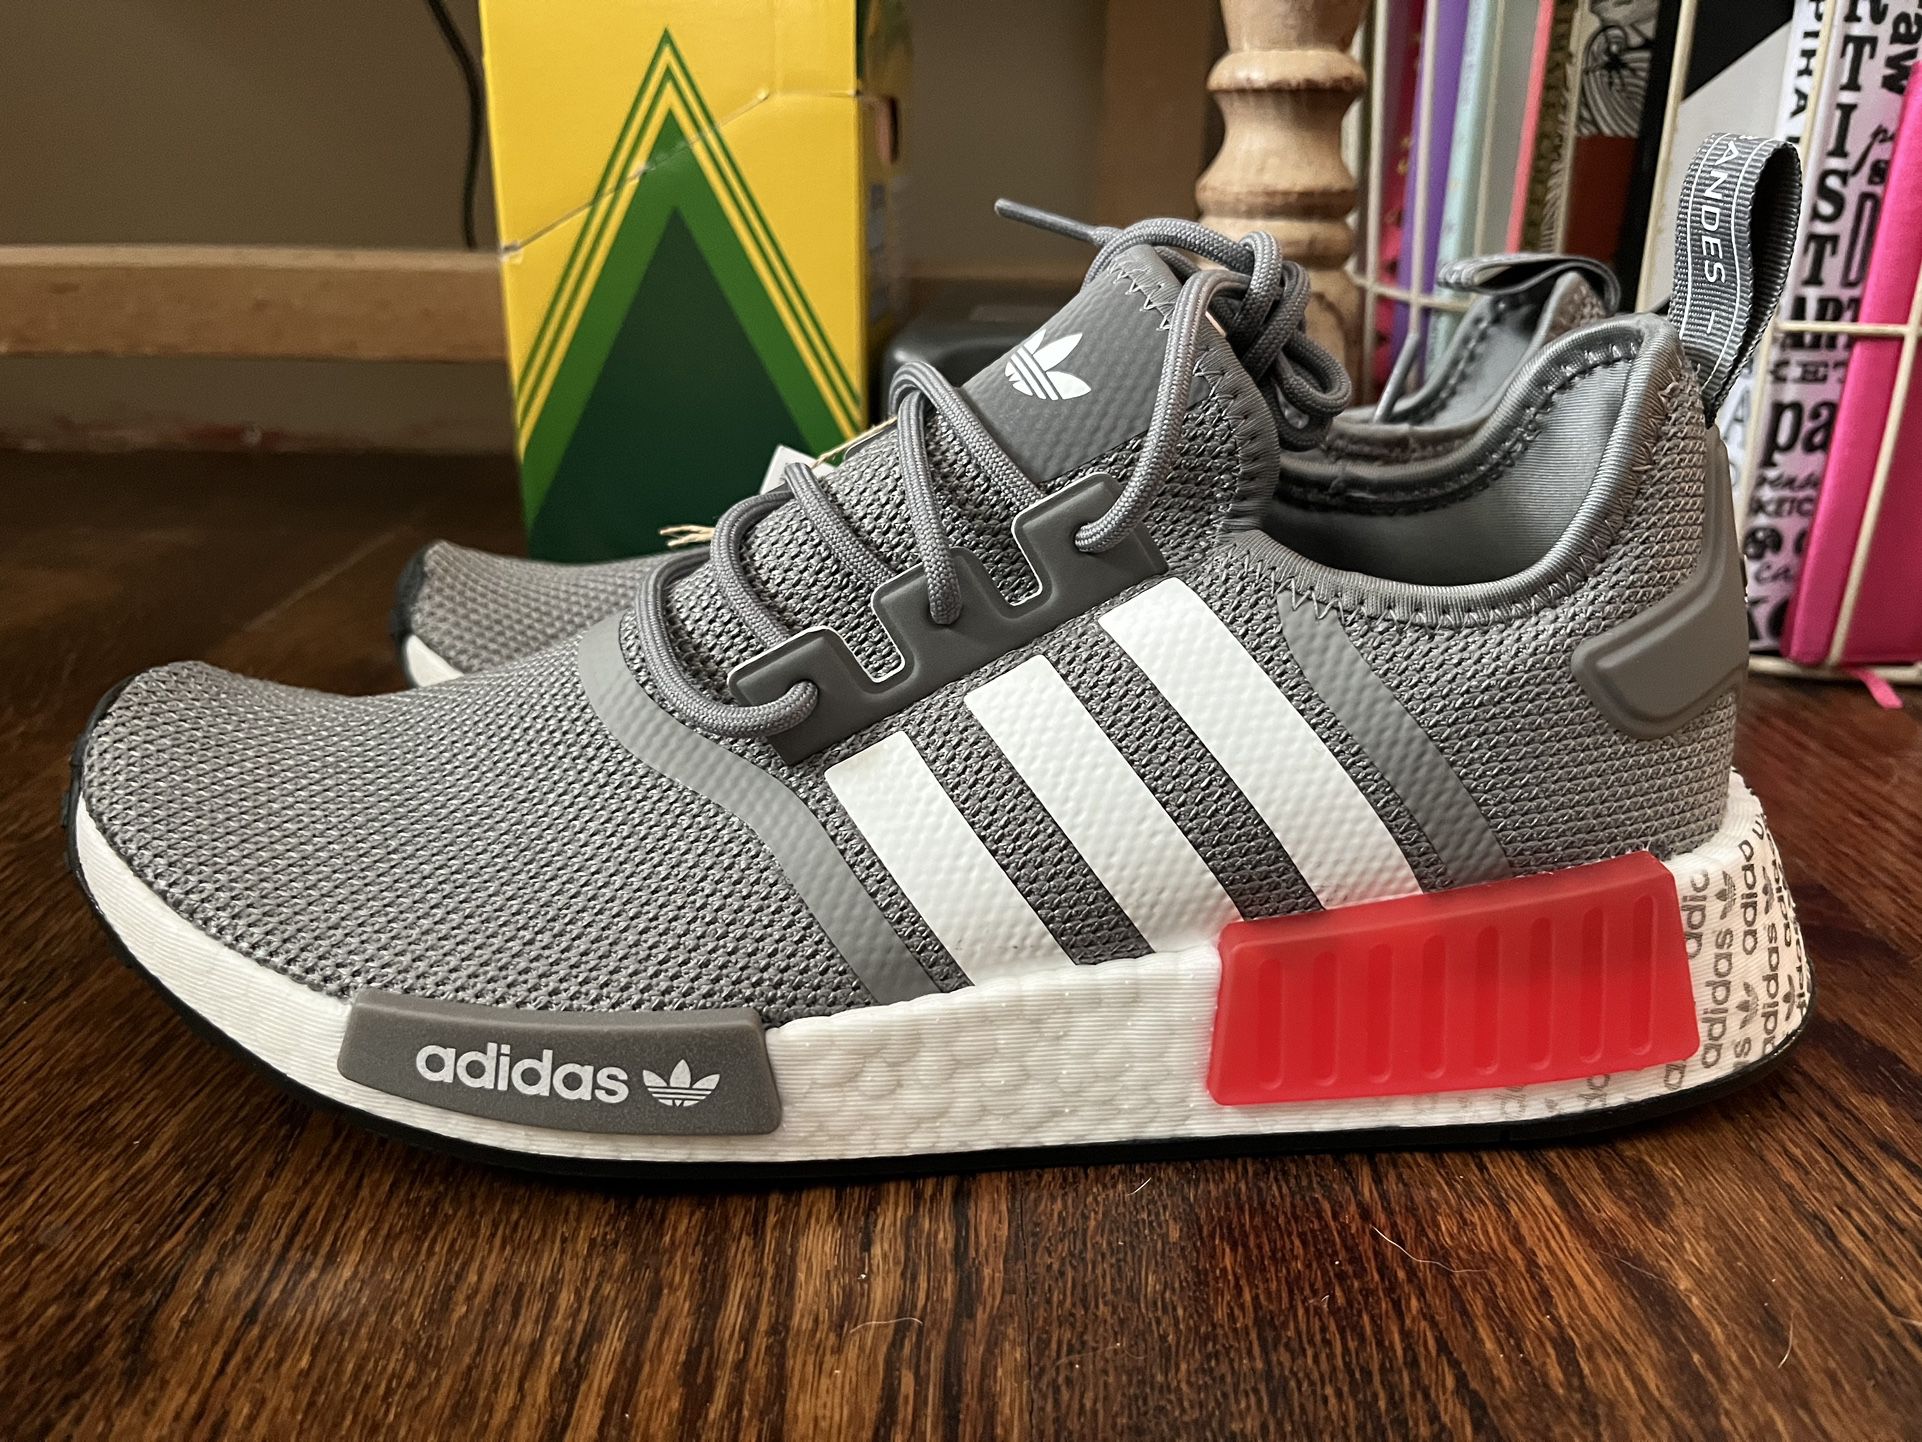 NEW Adidas NMD R1 Shoes Grey/White/Red GY4874 Size - for Sale in Afton, -